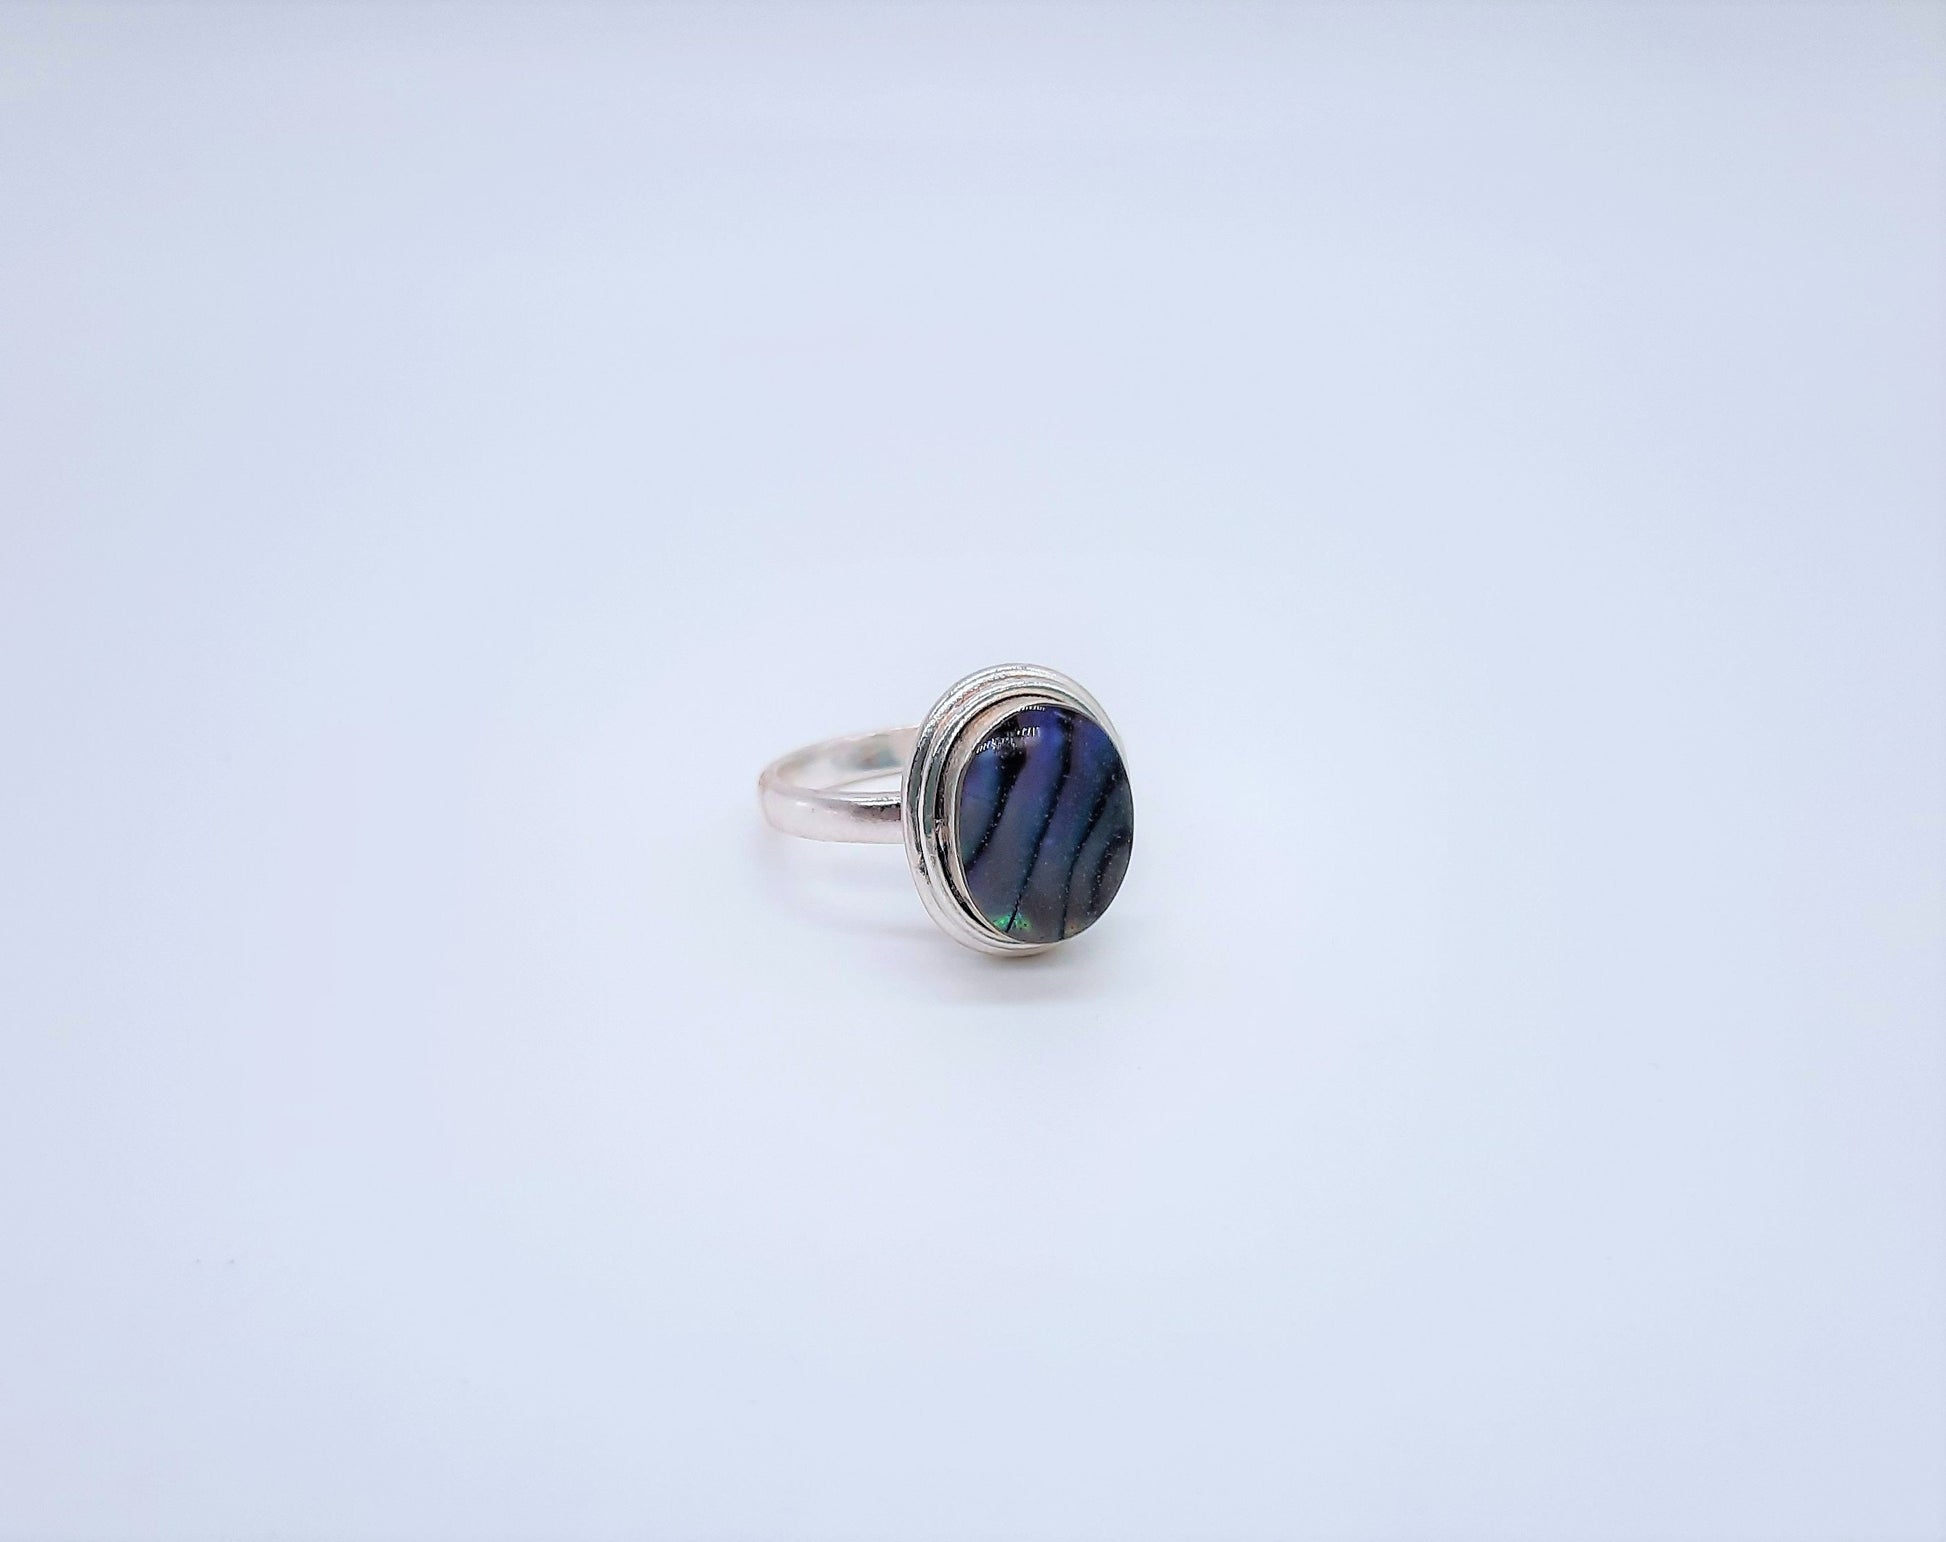 Handmade / Handcrafted 925 Sterling Silver Natural Purple Abalone / Paua Seashell Ring, Oval, Sealed with Holographic Mica Infused Resin